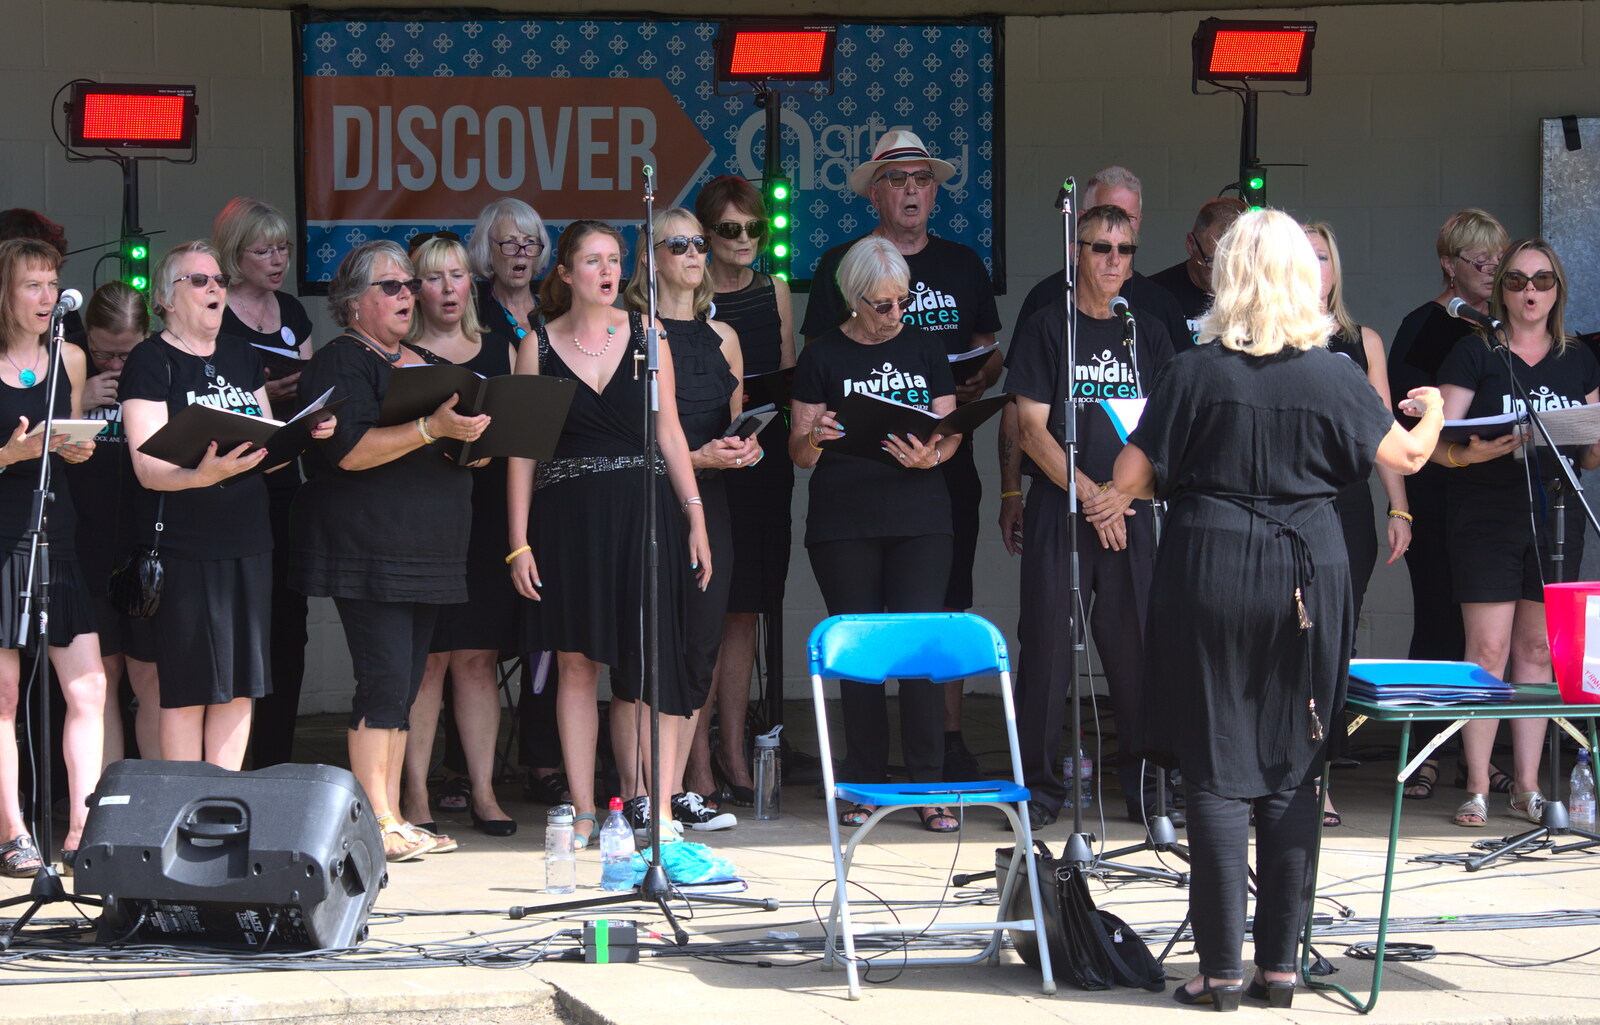 More Invidia singing from Diss Fest, The Park, Diss, Norfolk - 22nd July 2018